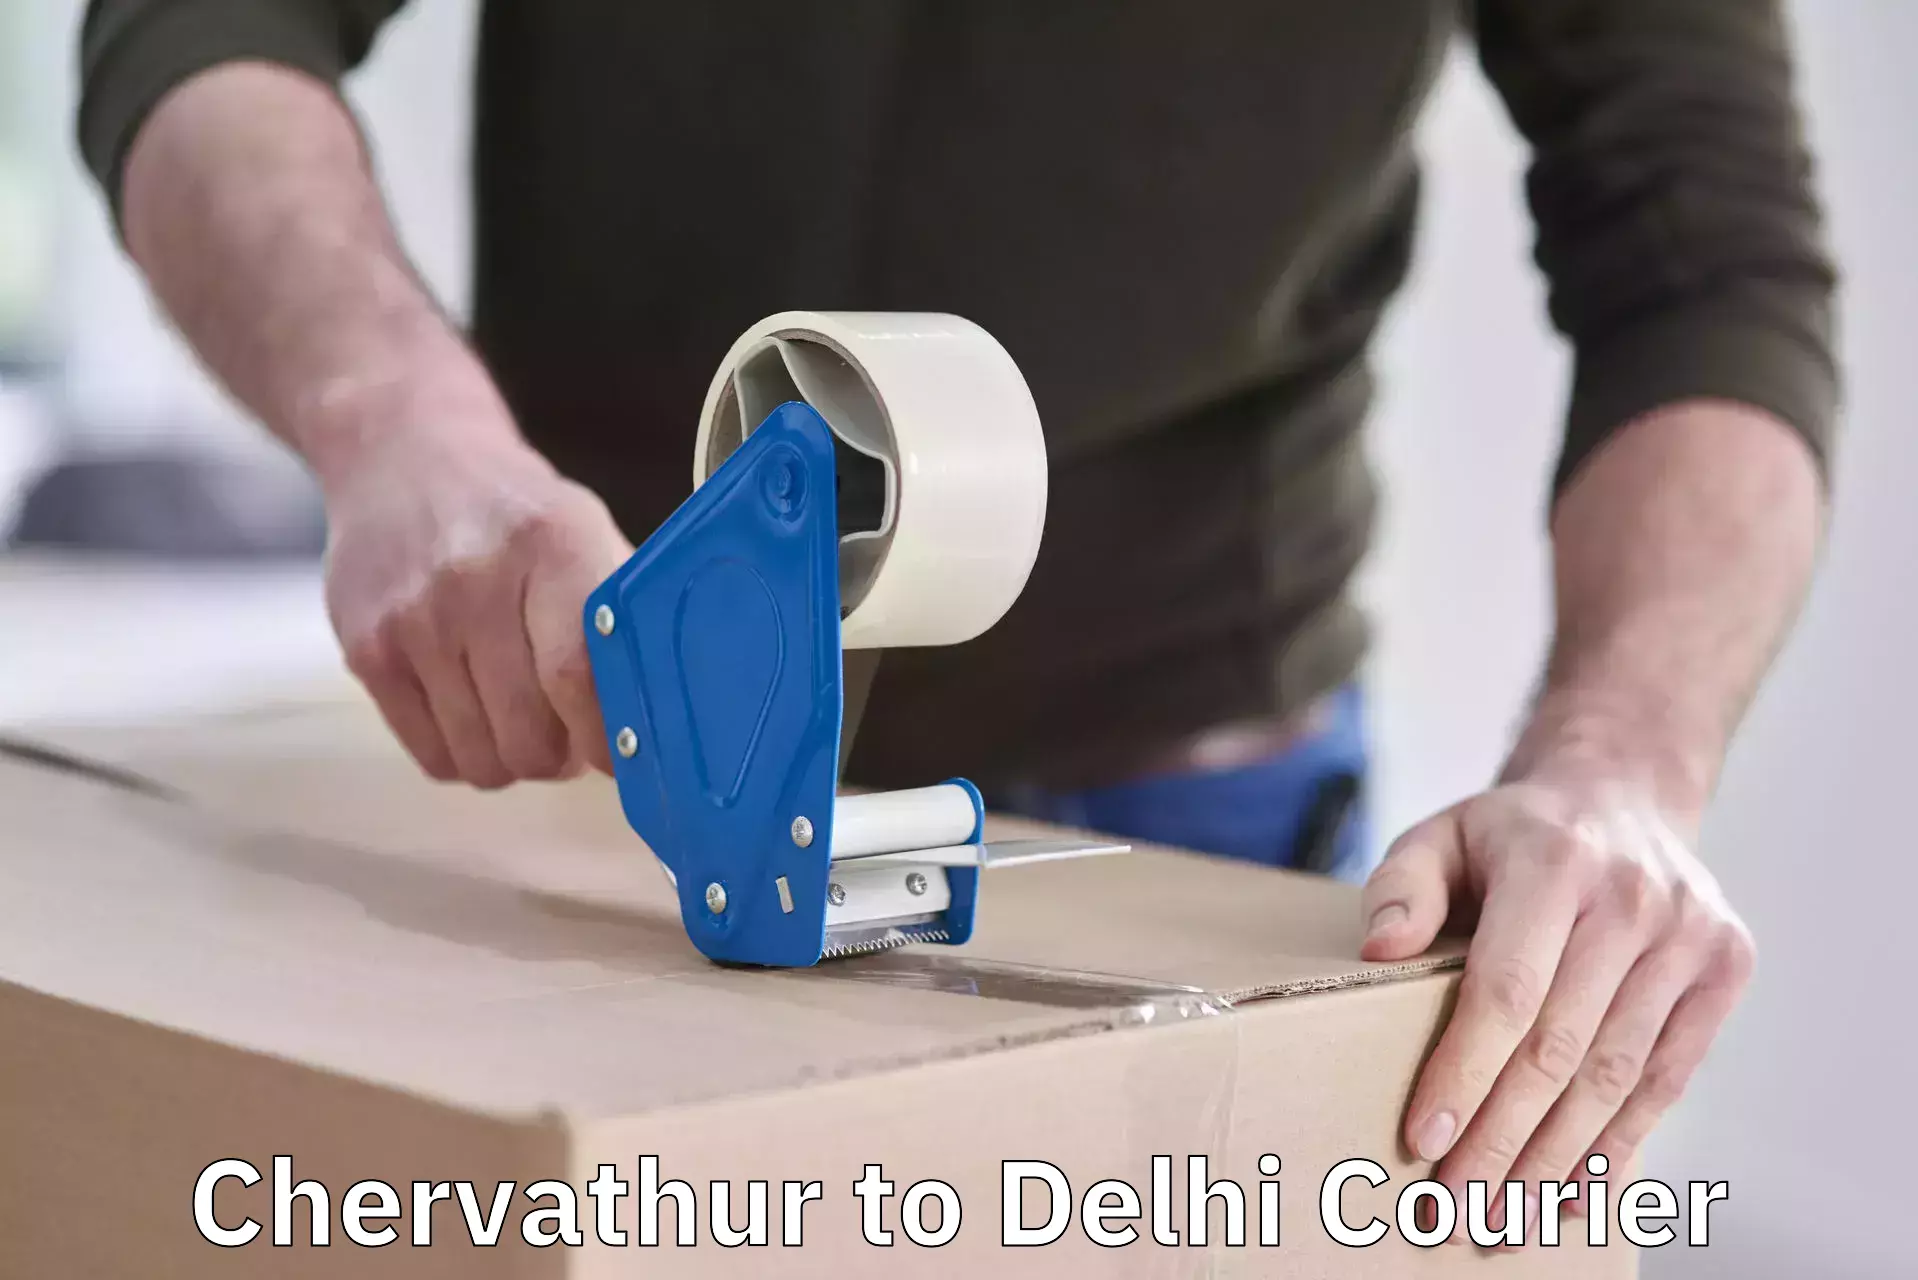 Luggage transport consulting Chervathur to University of Delhi